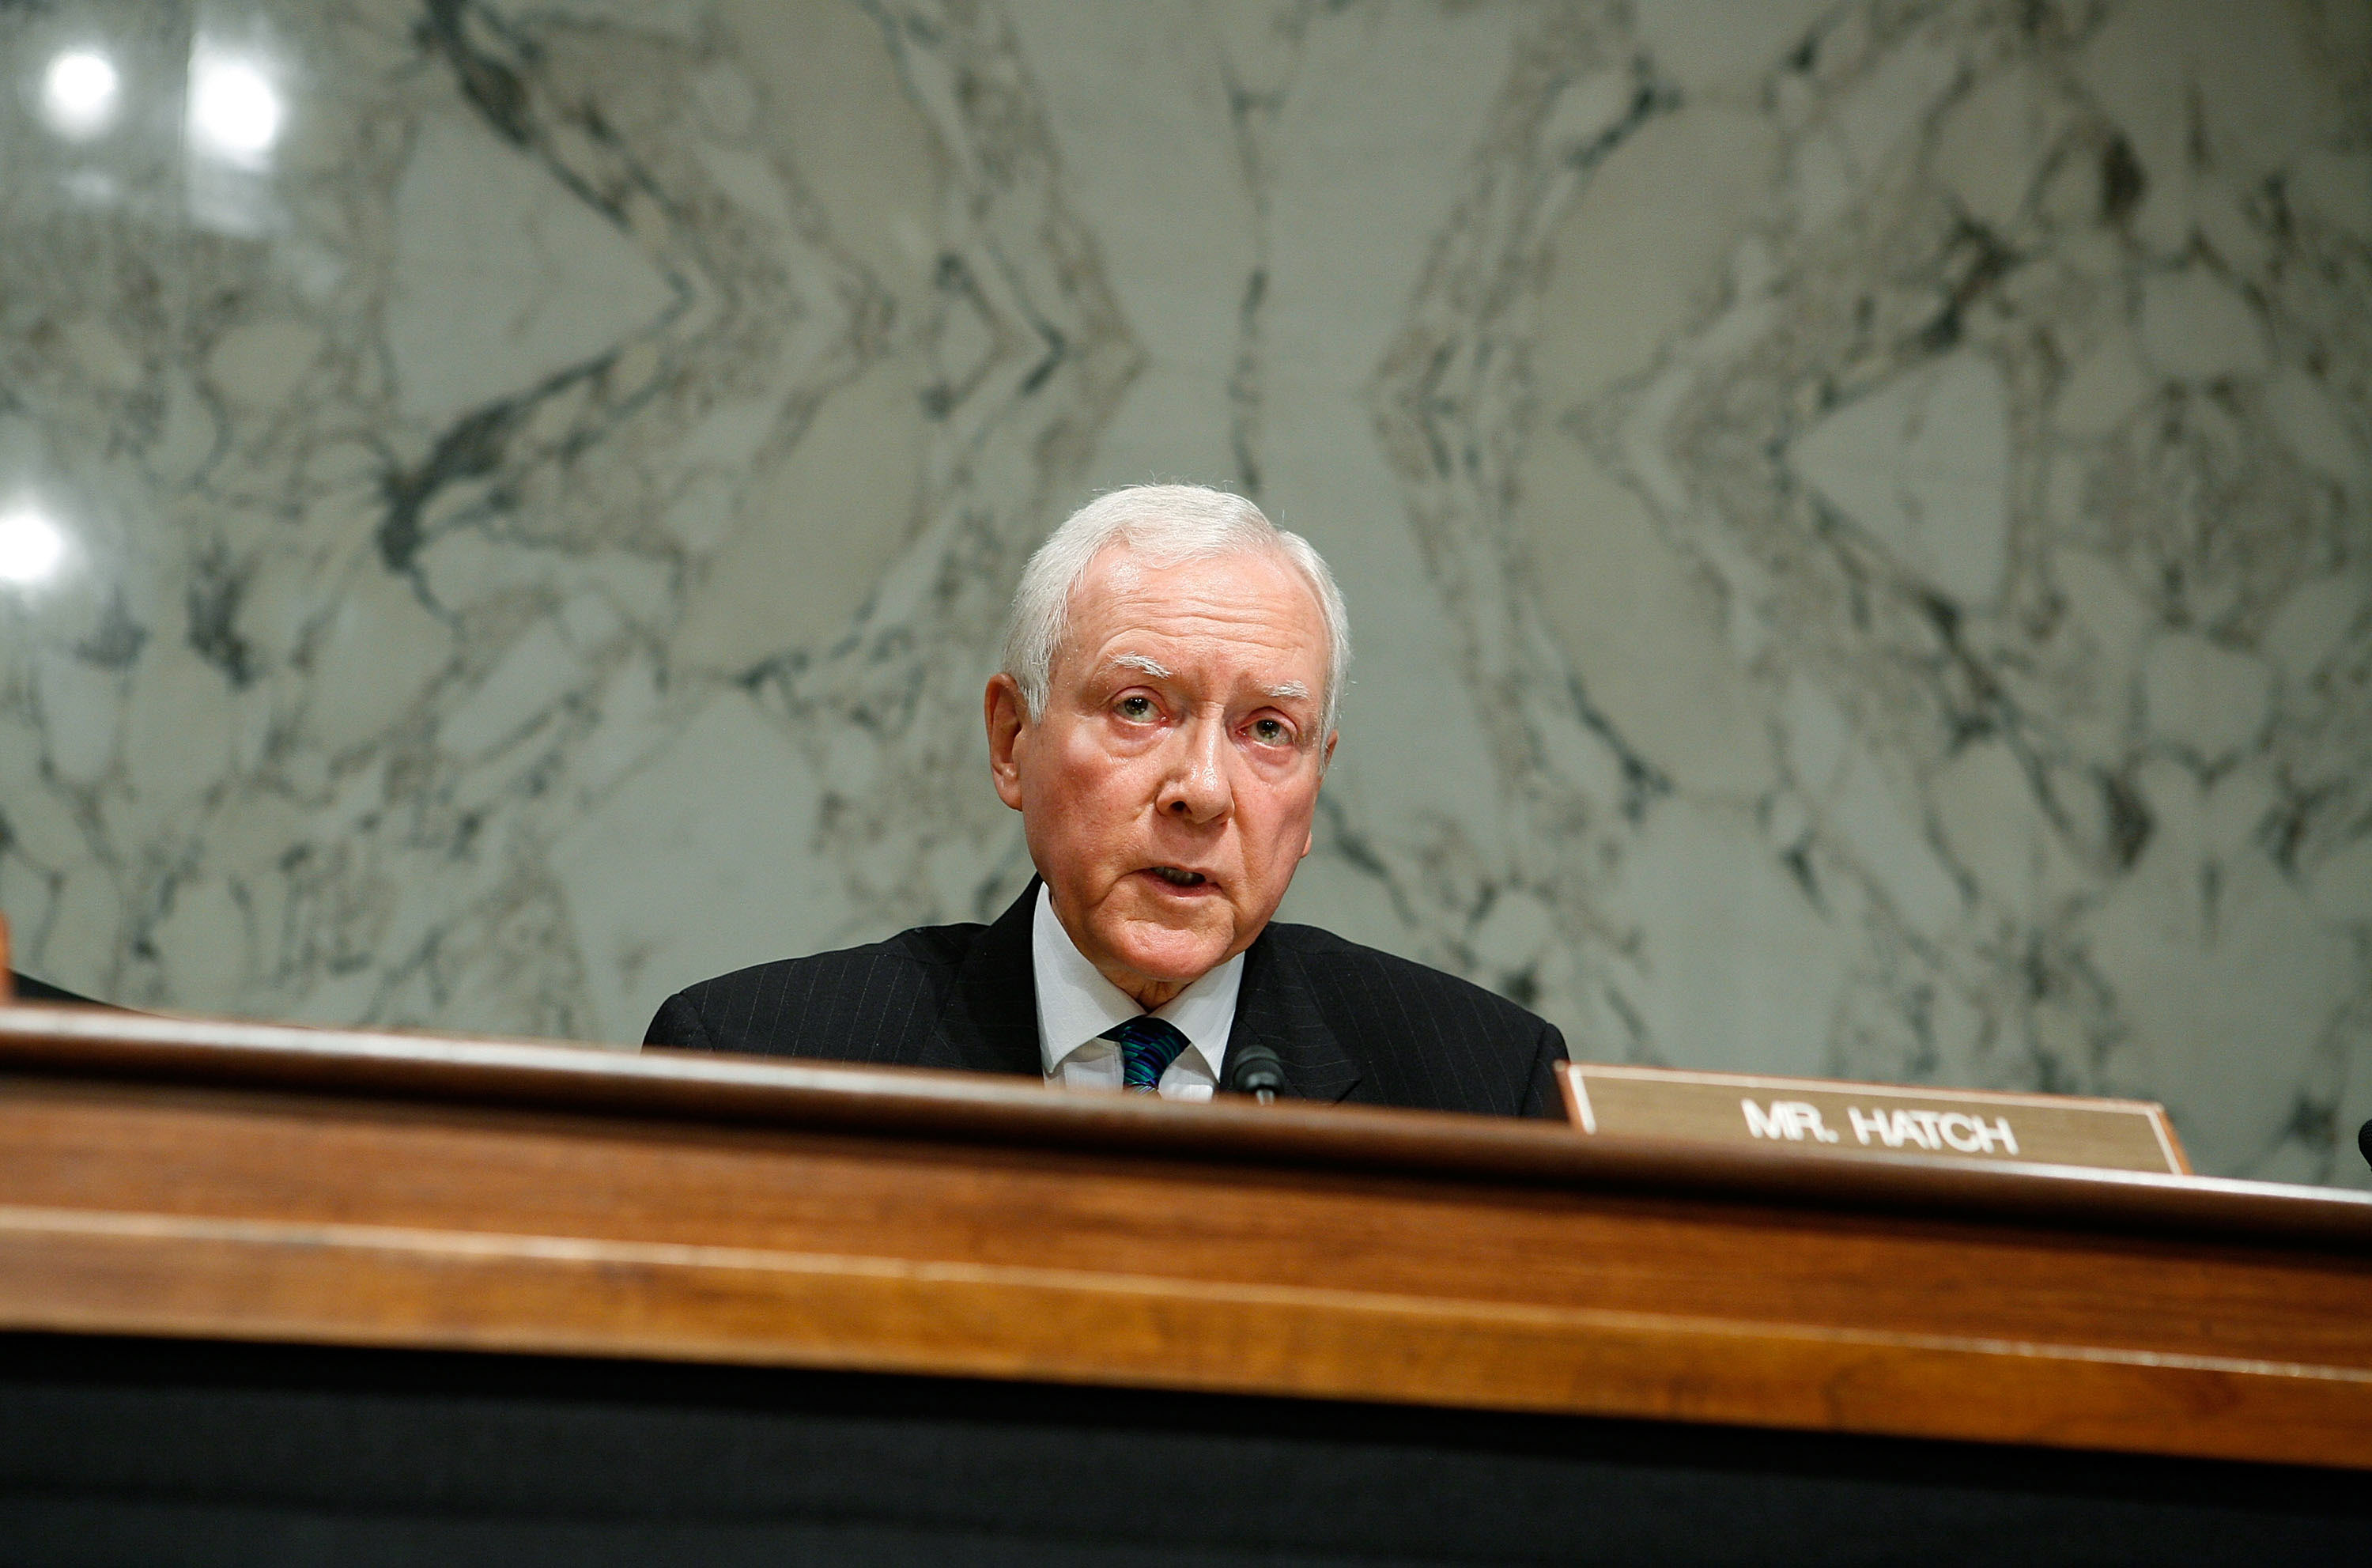 U.S. Sen. Orrin Hatch (R-UT) speaks during a mark up hearing before the Senate Finance Committee on Capitol Hill in Washington, DC., on Sept. 23, 2009. (Alex Wong—Getty Images)